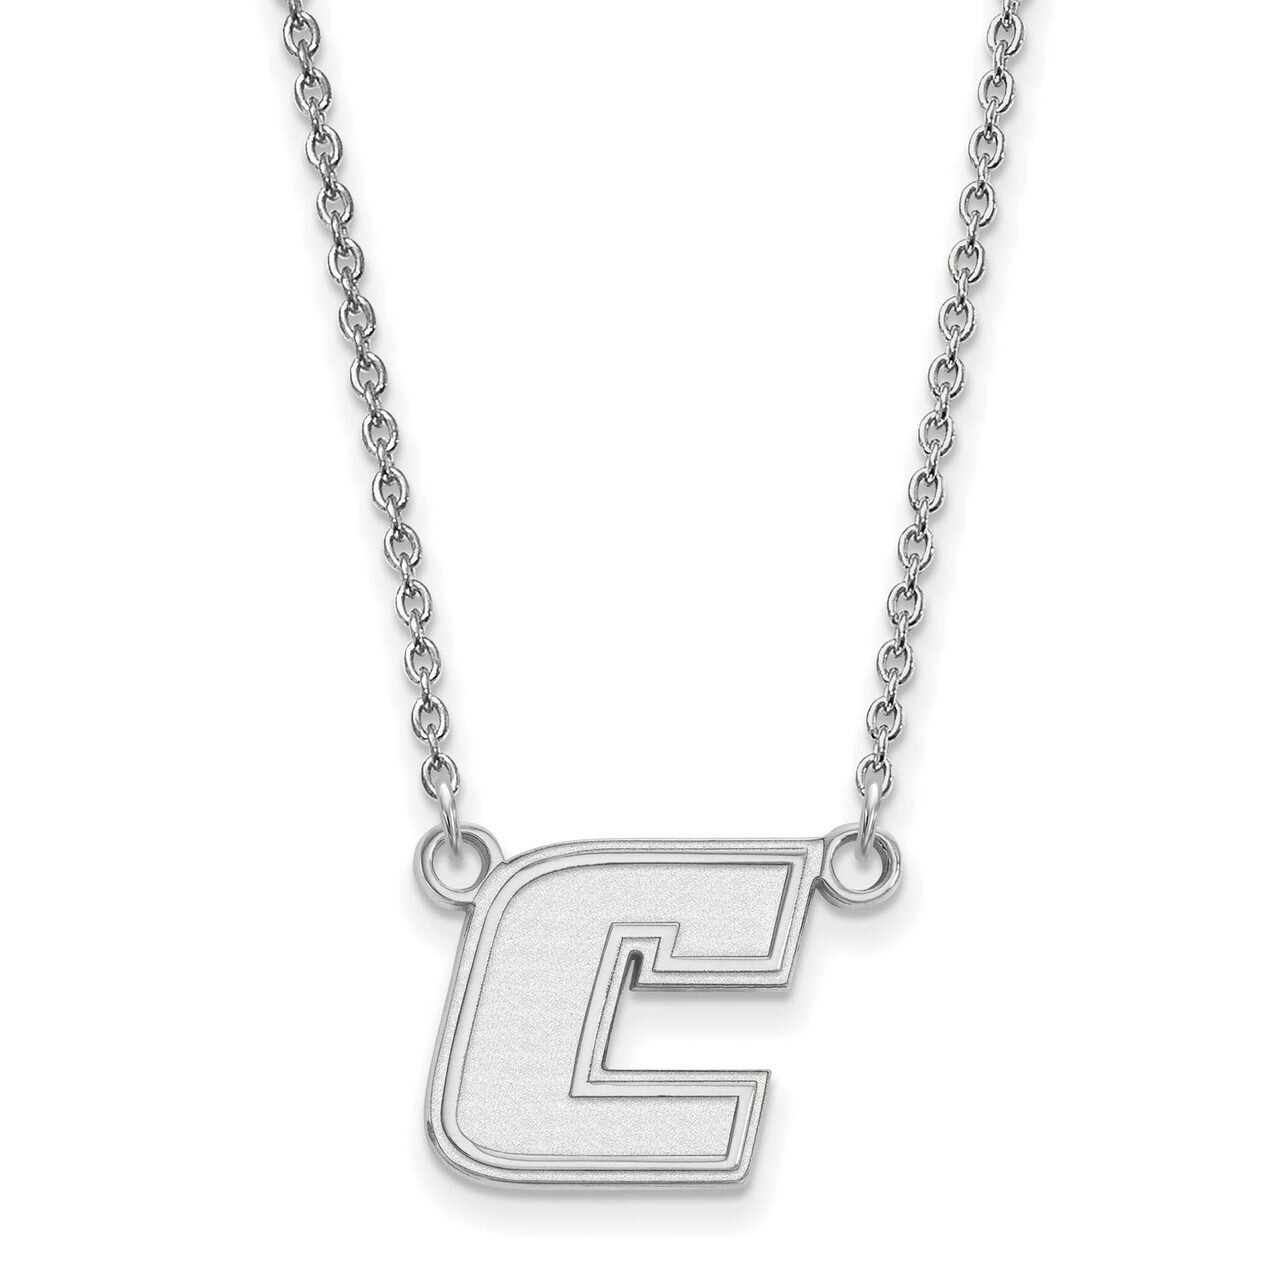 The University of Tennessee at Chattanooga Small Pendant with Chain Necklace Sterling Silver SS007UTC-18